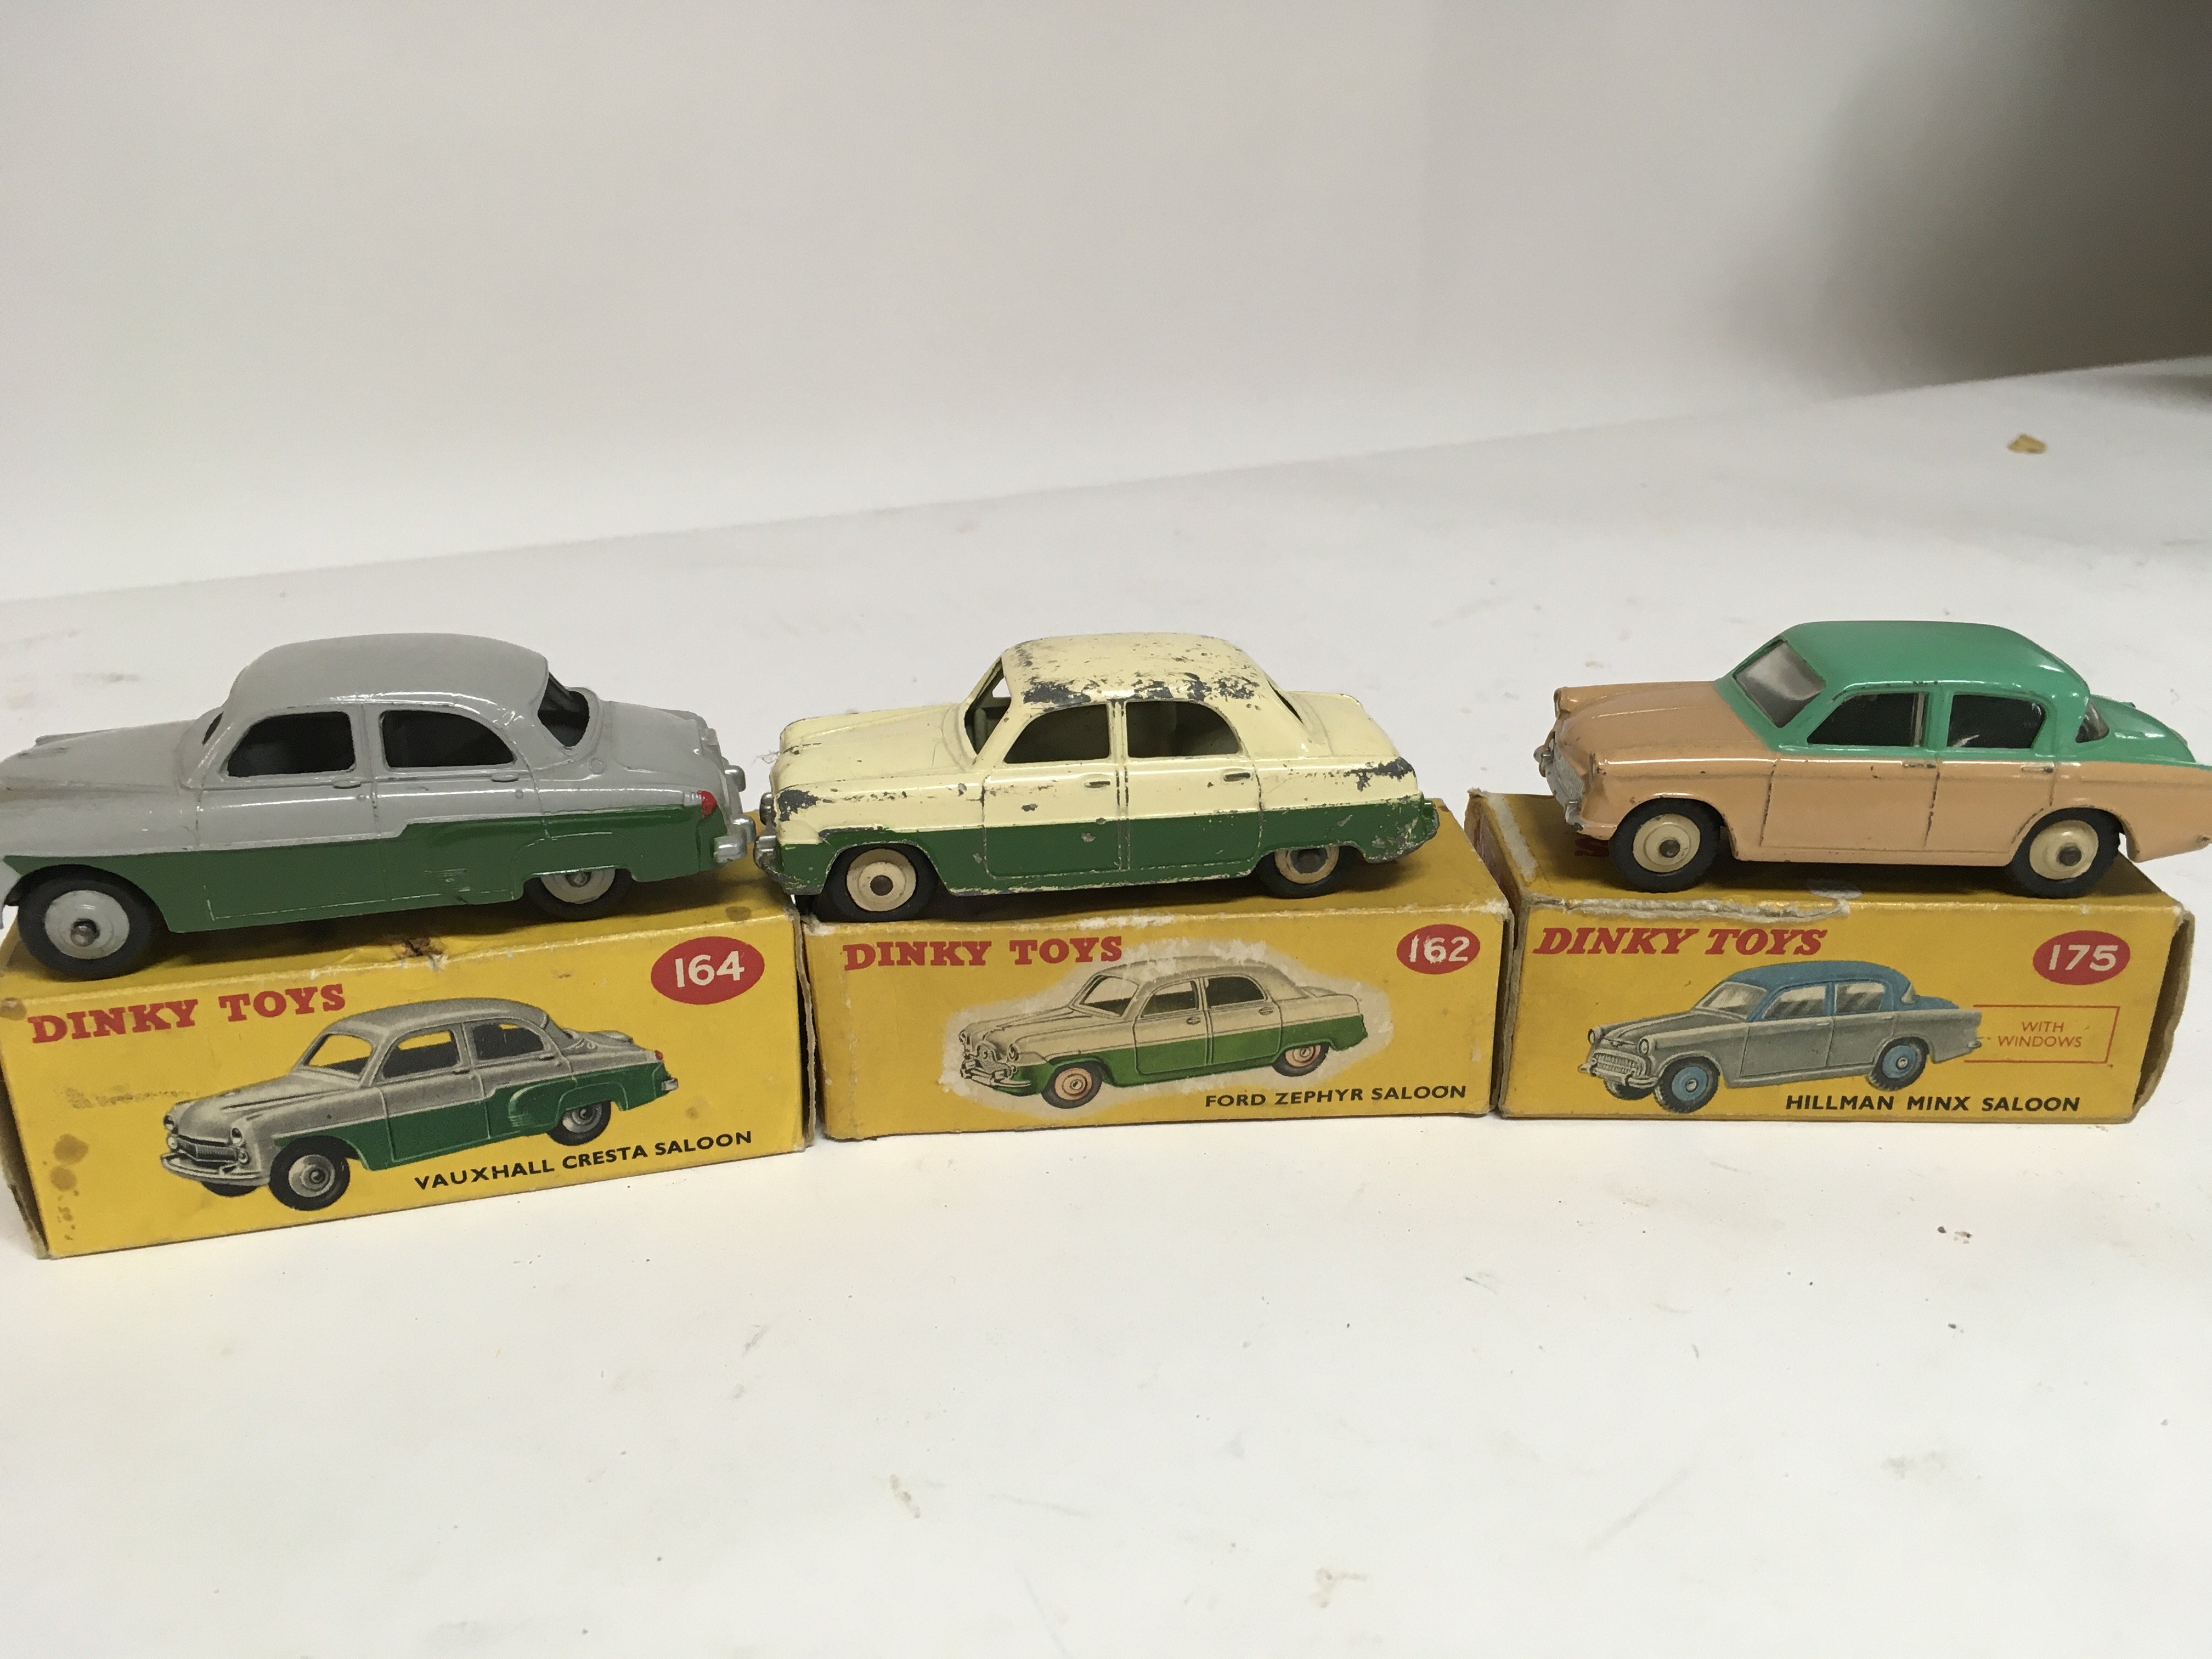 Dinky toys, boxed, #164 Vauxhall cresta saloon, #1